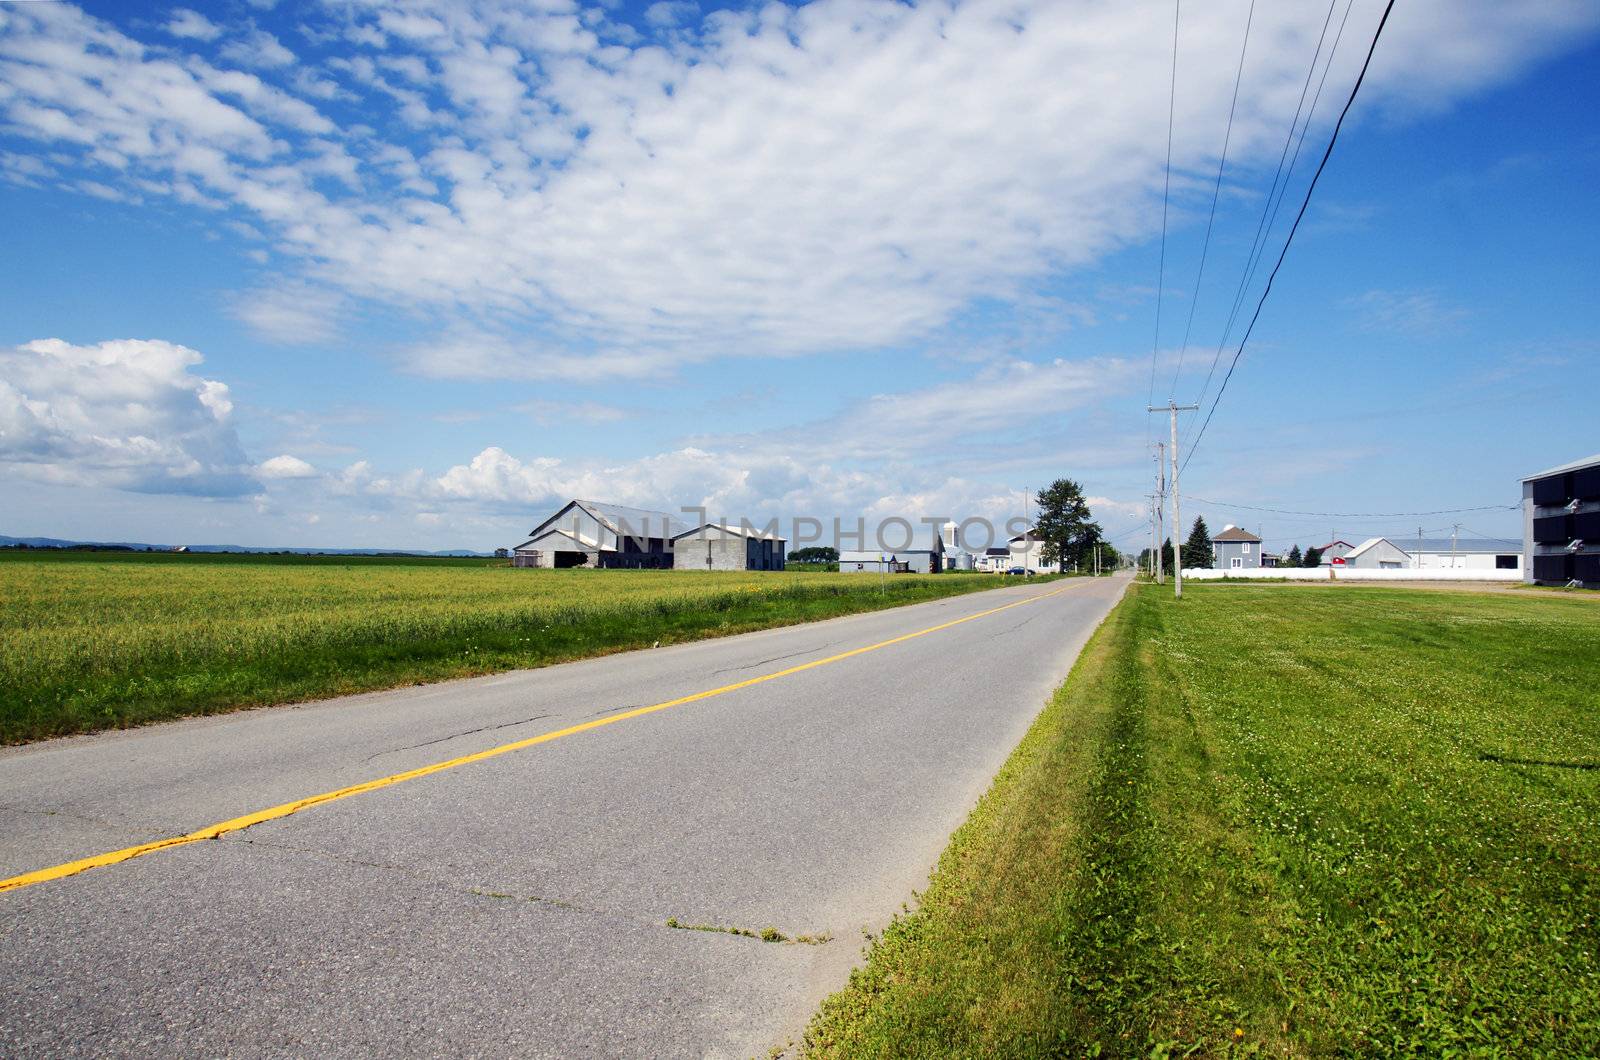 Perspective shot of the country side with a rural road in Quebec, Canada, with fields and farms, barn, hay bales and chicken coop.